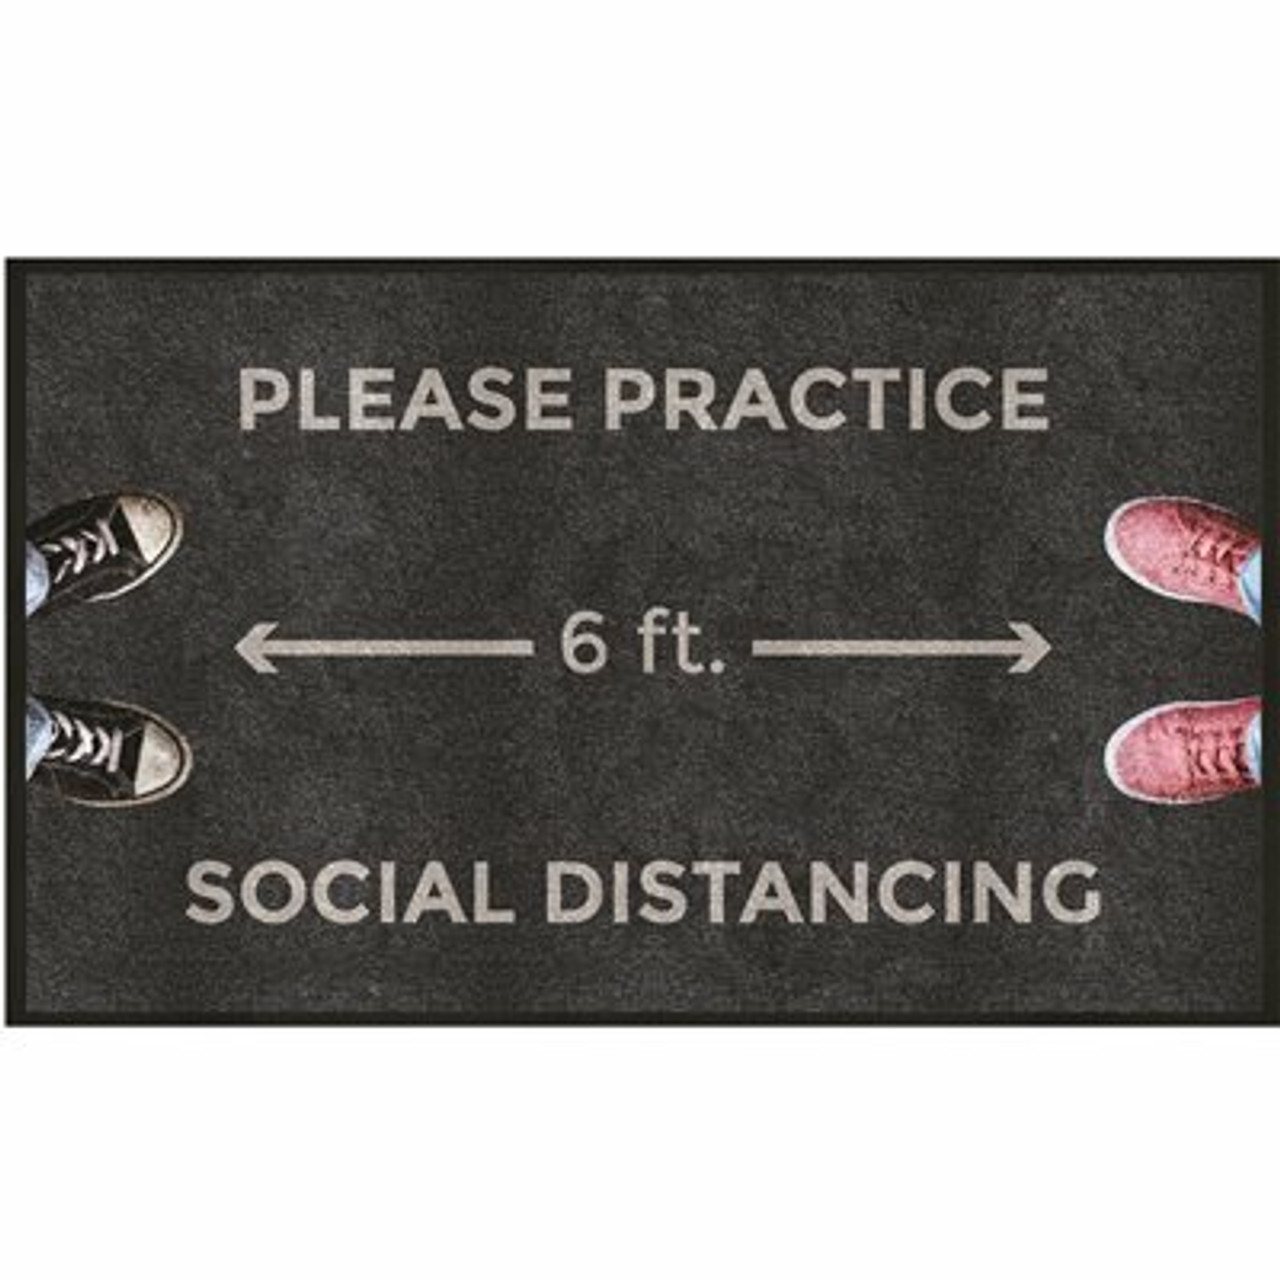 M+A Matting 3 In. X 5 In. Please Practice Social Distancing Floor Mat Social Distancing Reminder Entrance Mat